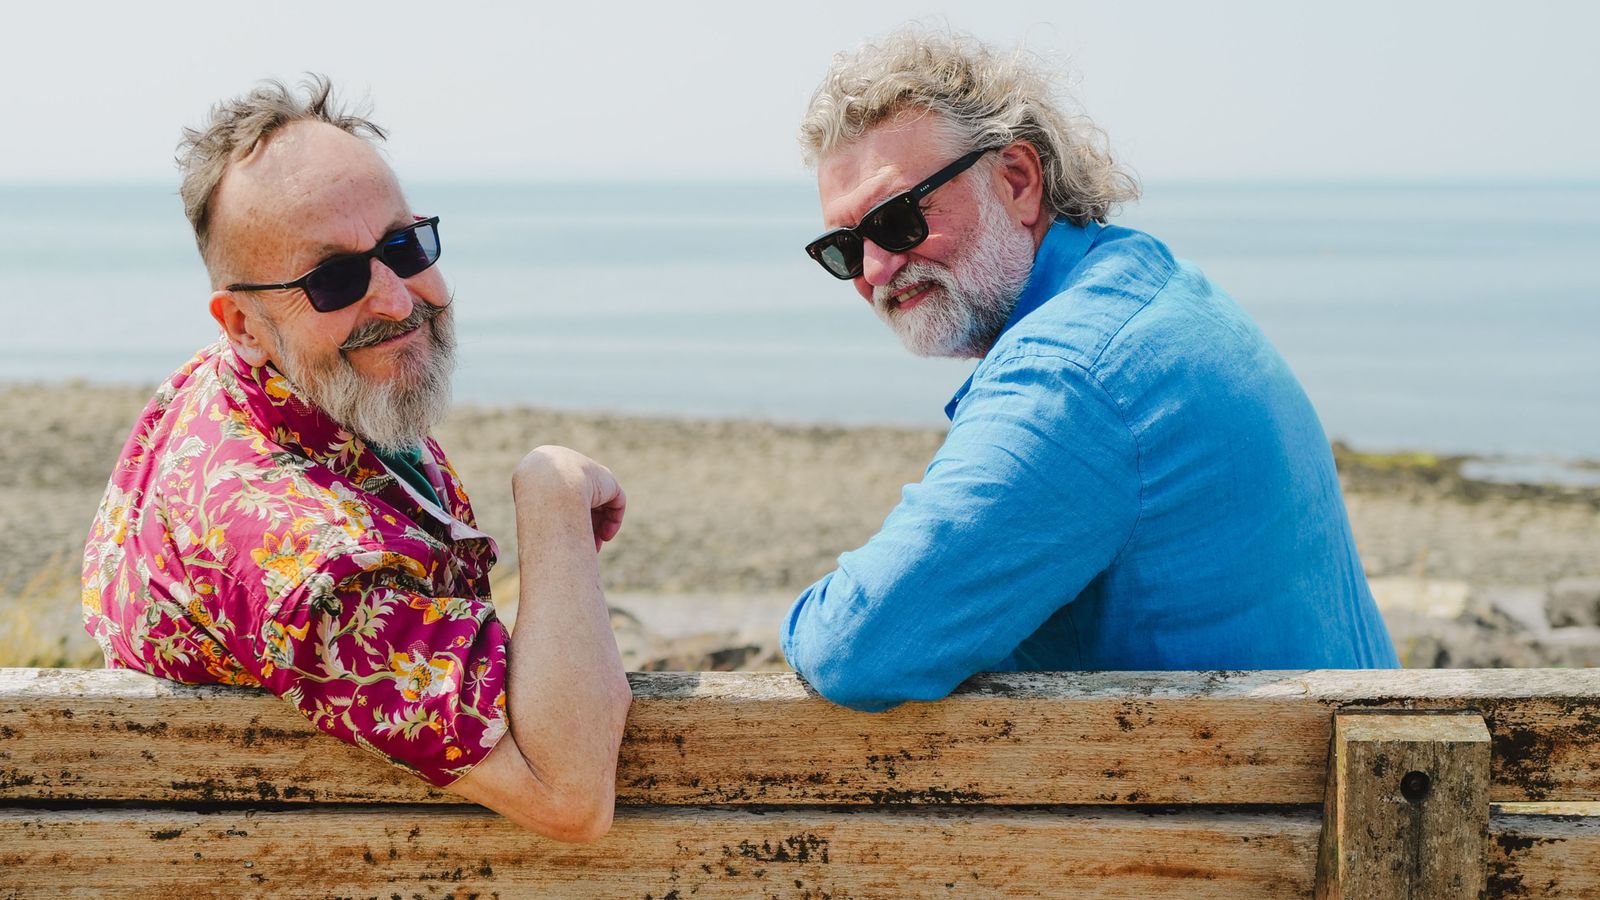 Emotional last episode of Hairy Bikers airs following Dave Myers's death